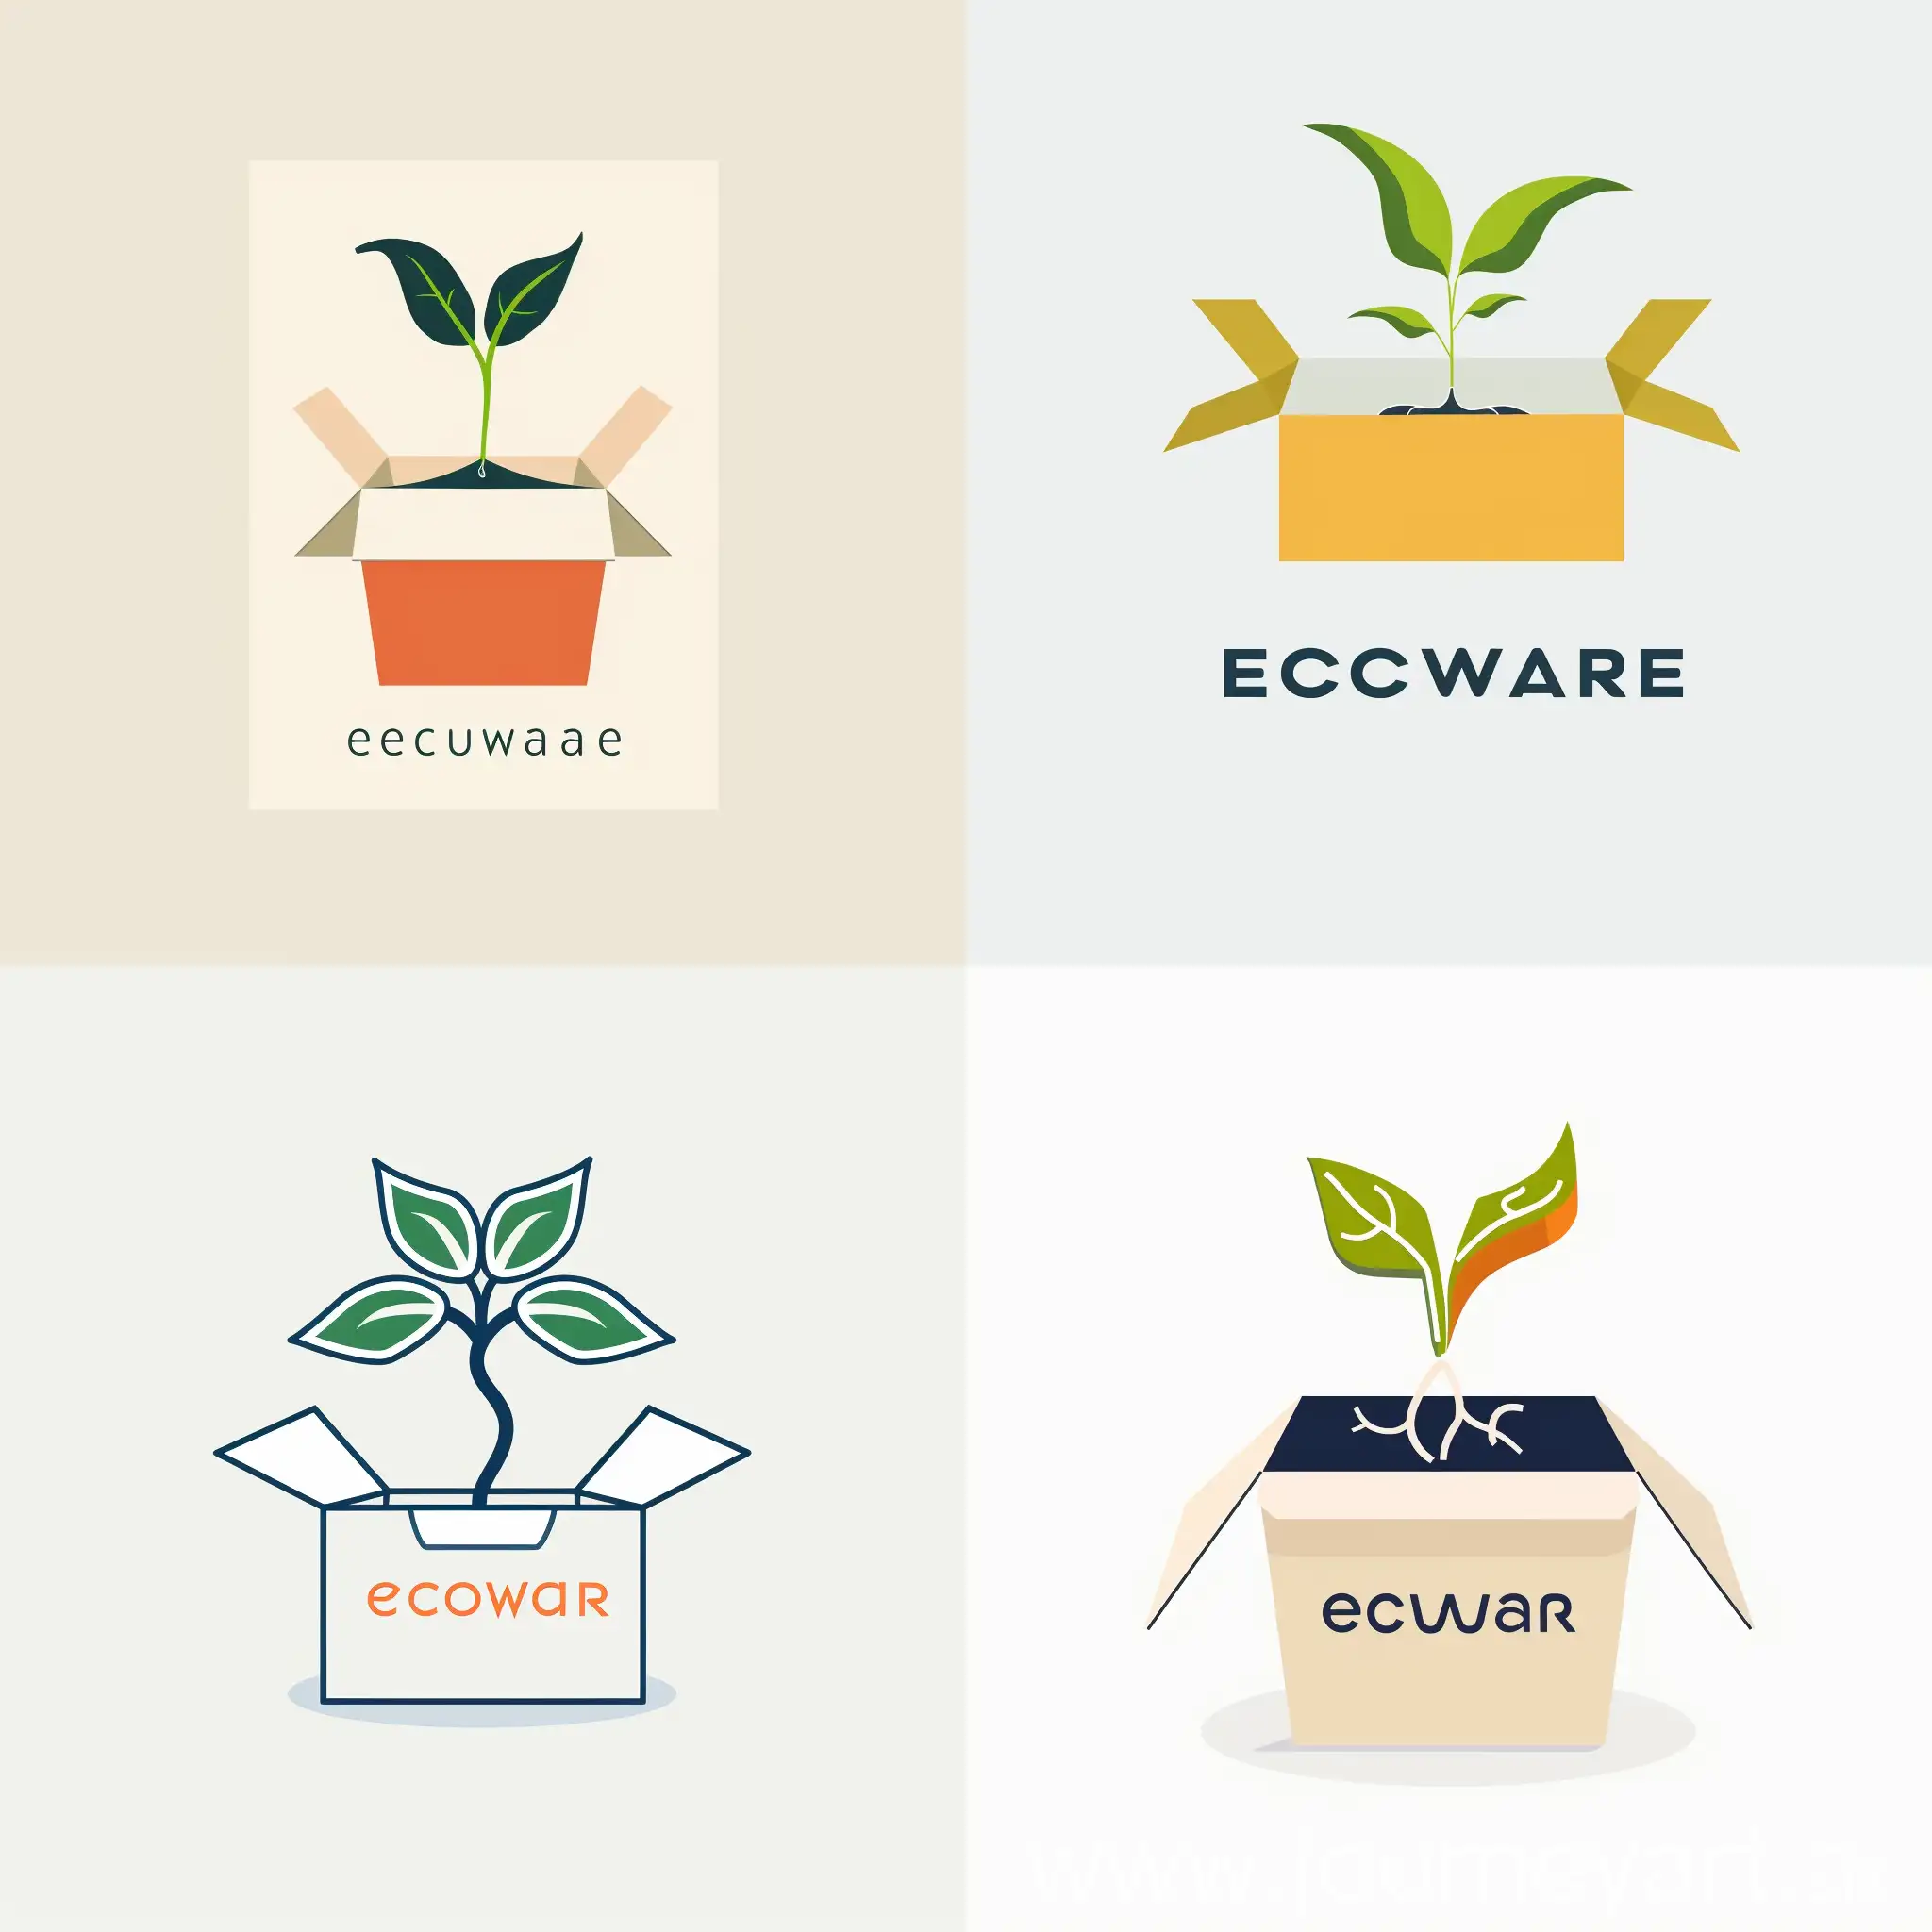  A very stylish modern minimalistic logo for company Ecoware with text Ecoware, depicting a sprout breaking out of a takeout box, flat colors, minimal number of details